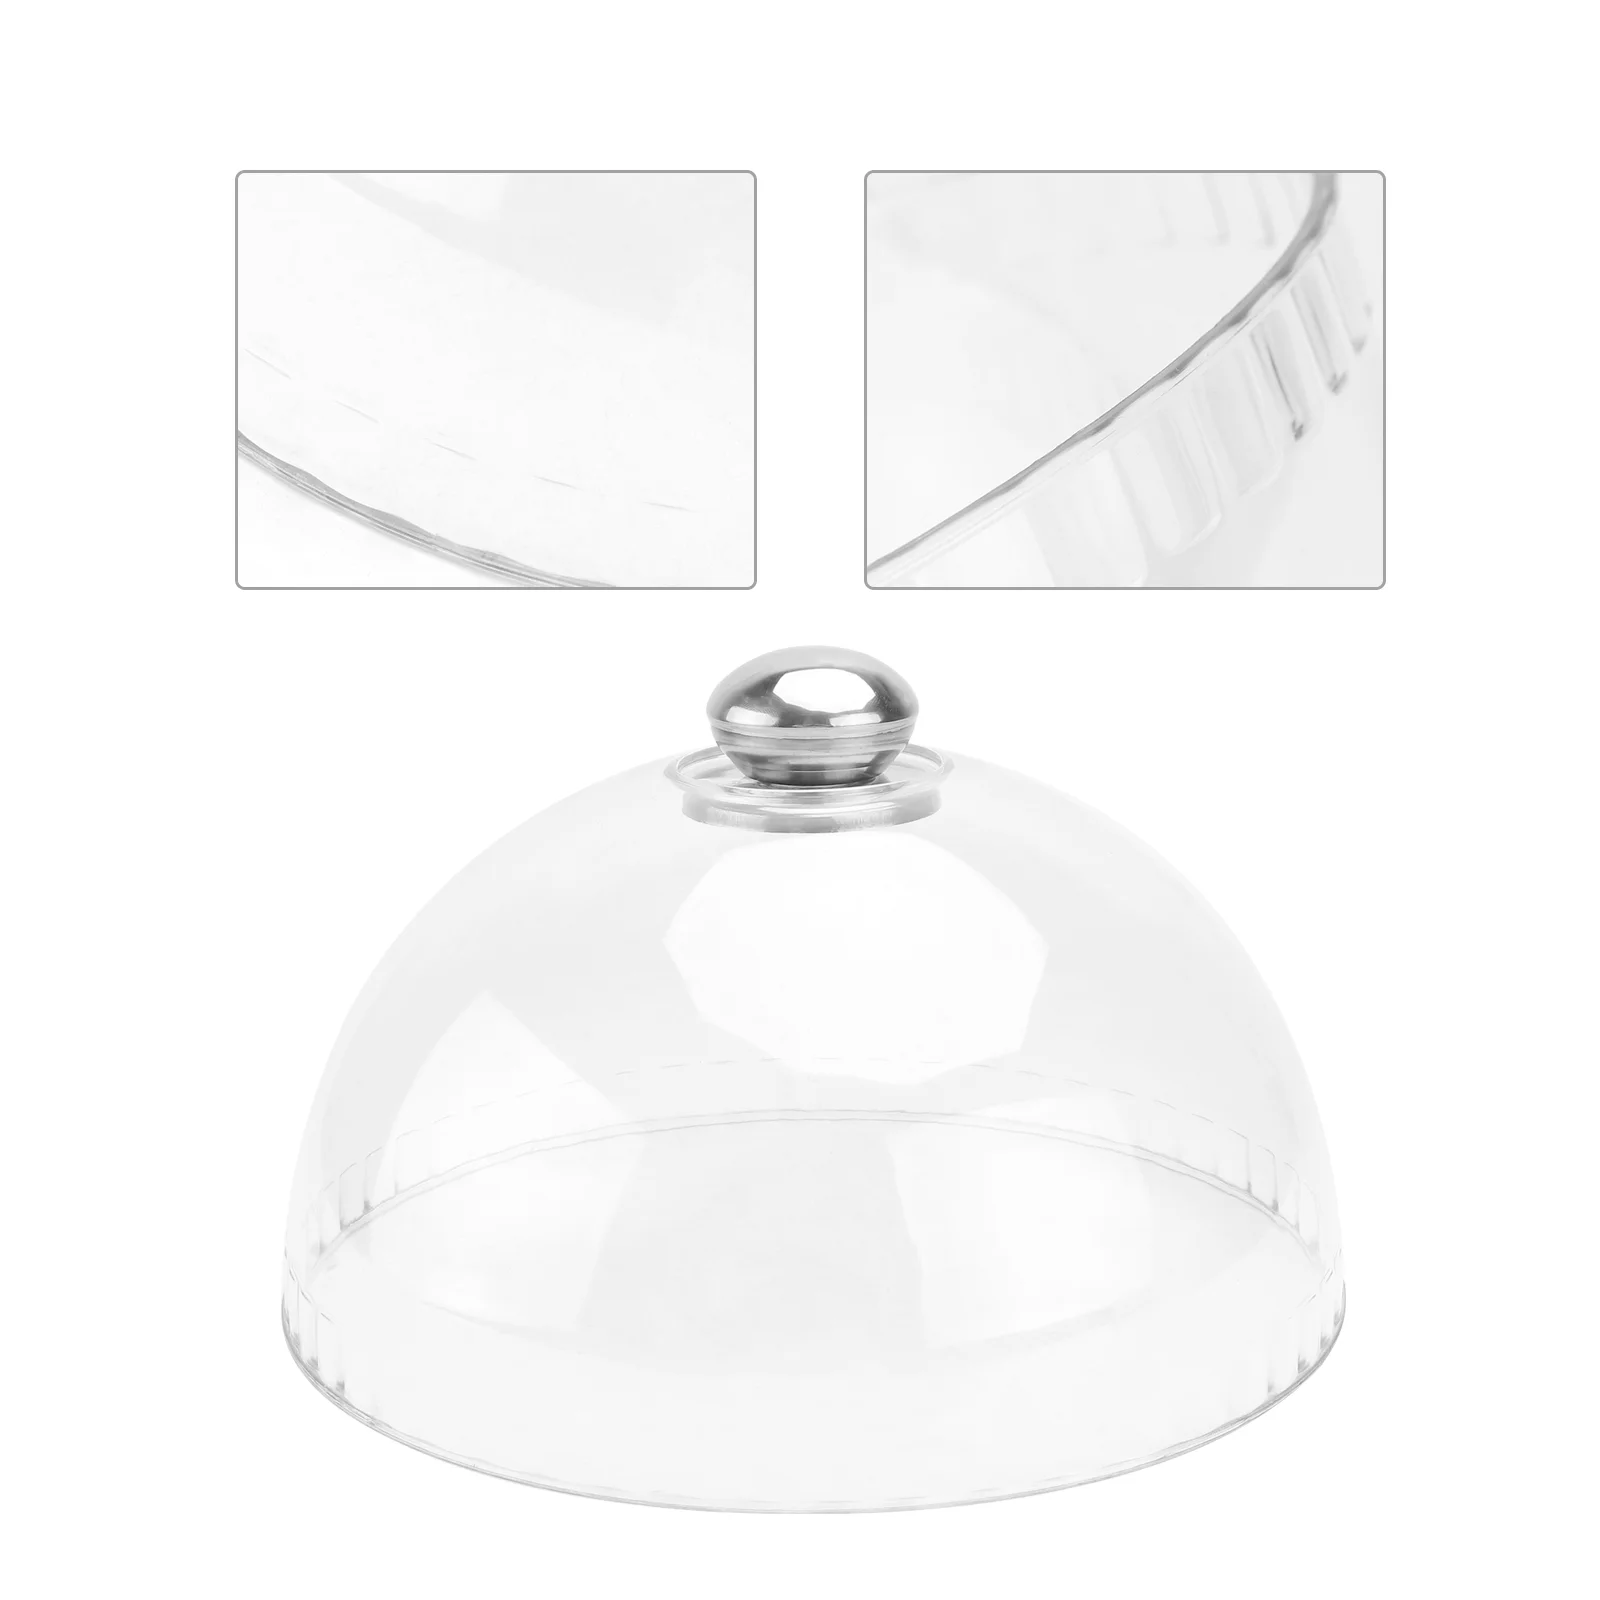 

Screen Tent Round Clear Cake Dome Transparent Cake Display Stand Base Cover Bread Plate Dish Cover Guard Dessert